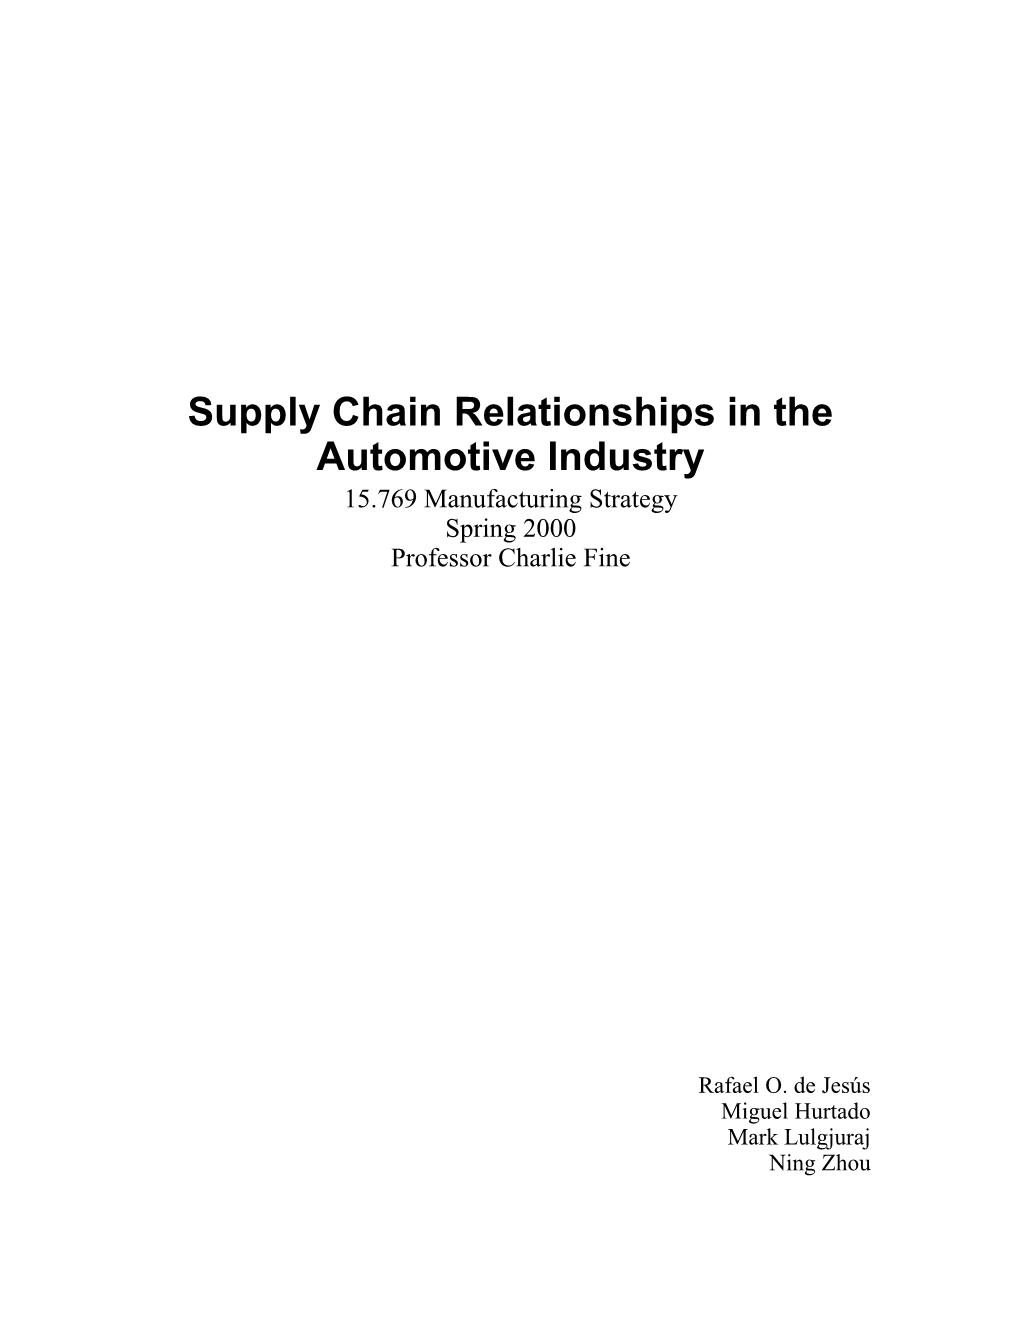 Supply Chain Relationships in the Automotive Industry